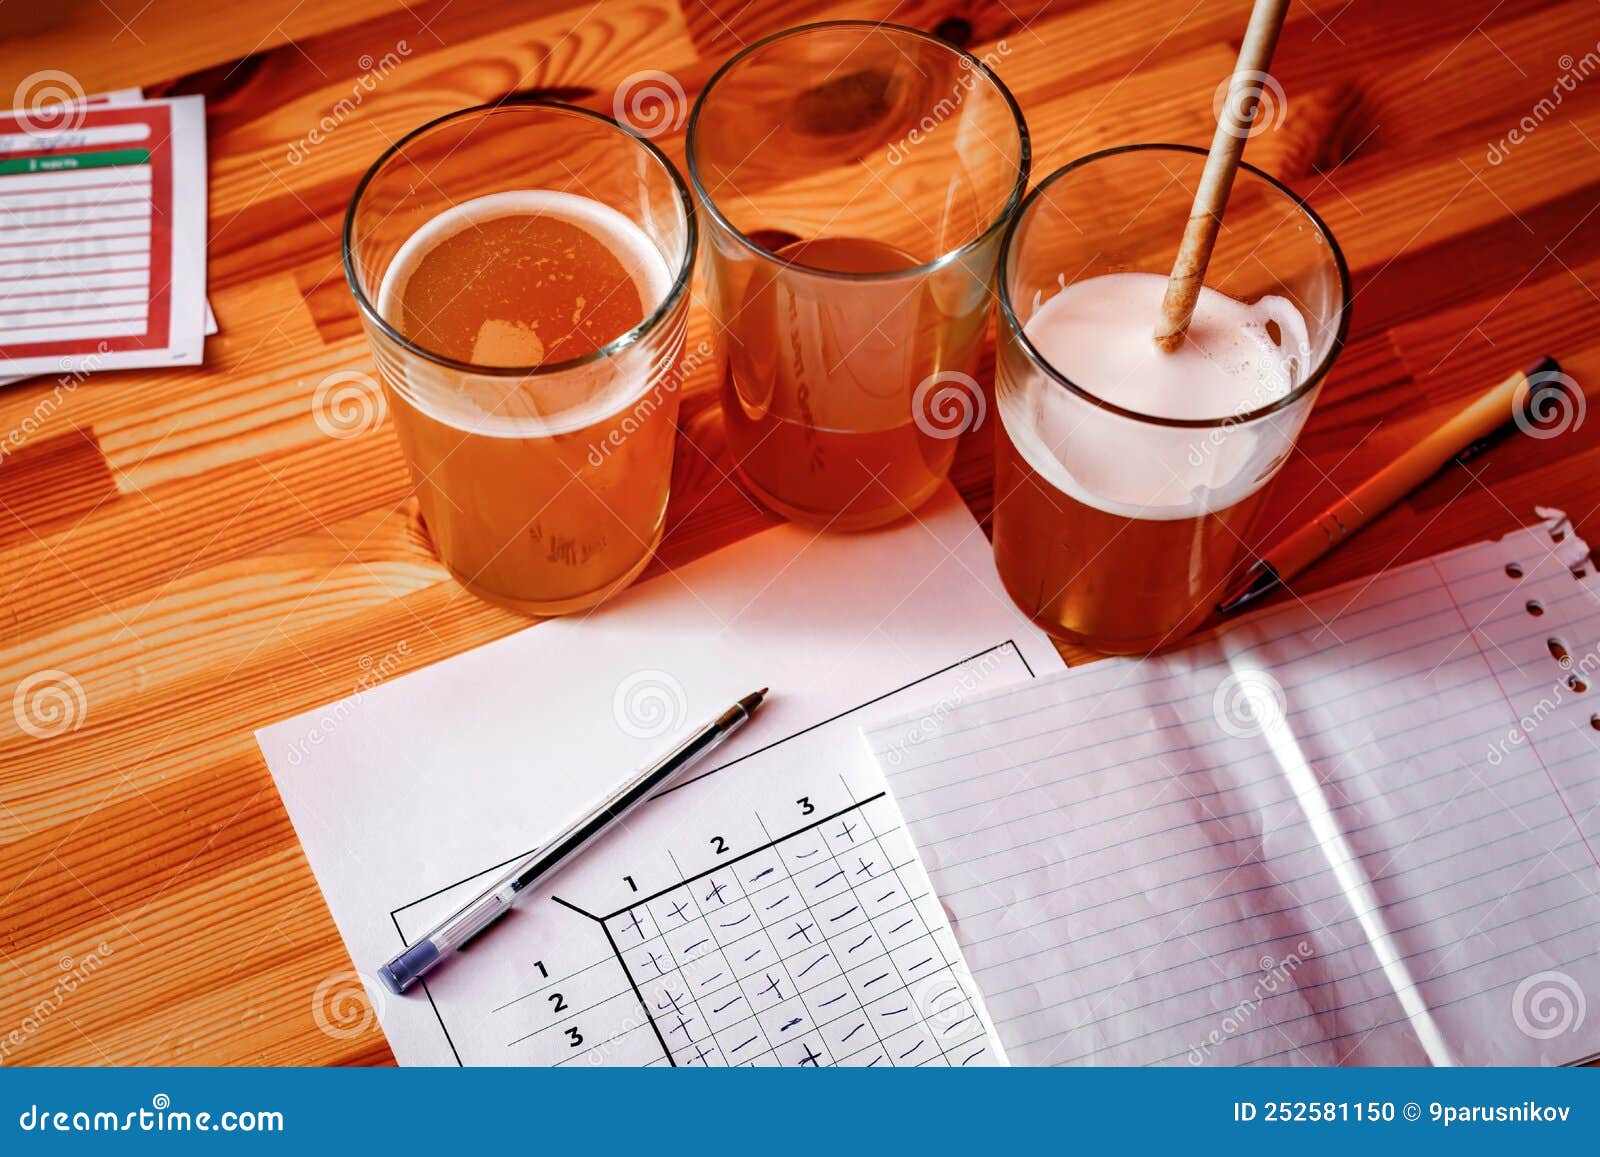 the pub quiz concept. beer glass and blank paper for answers.